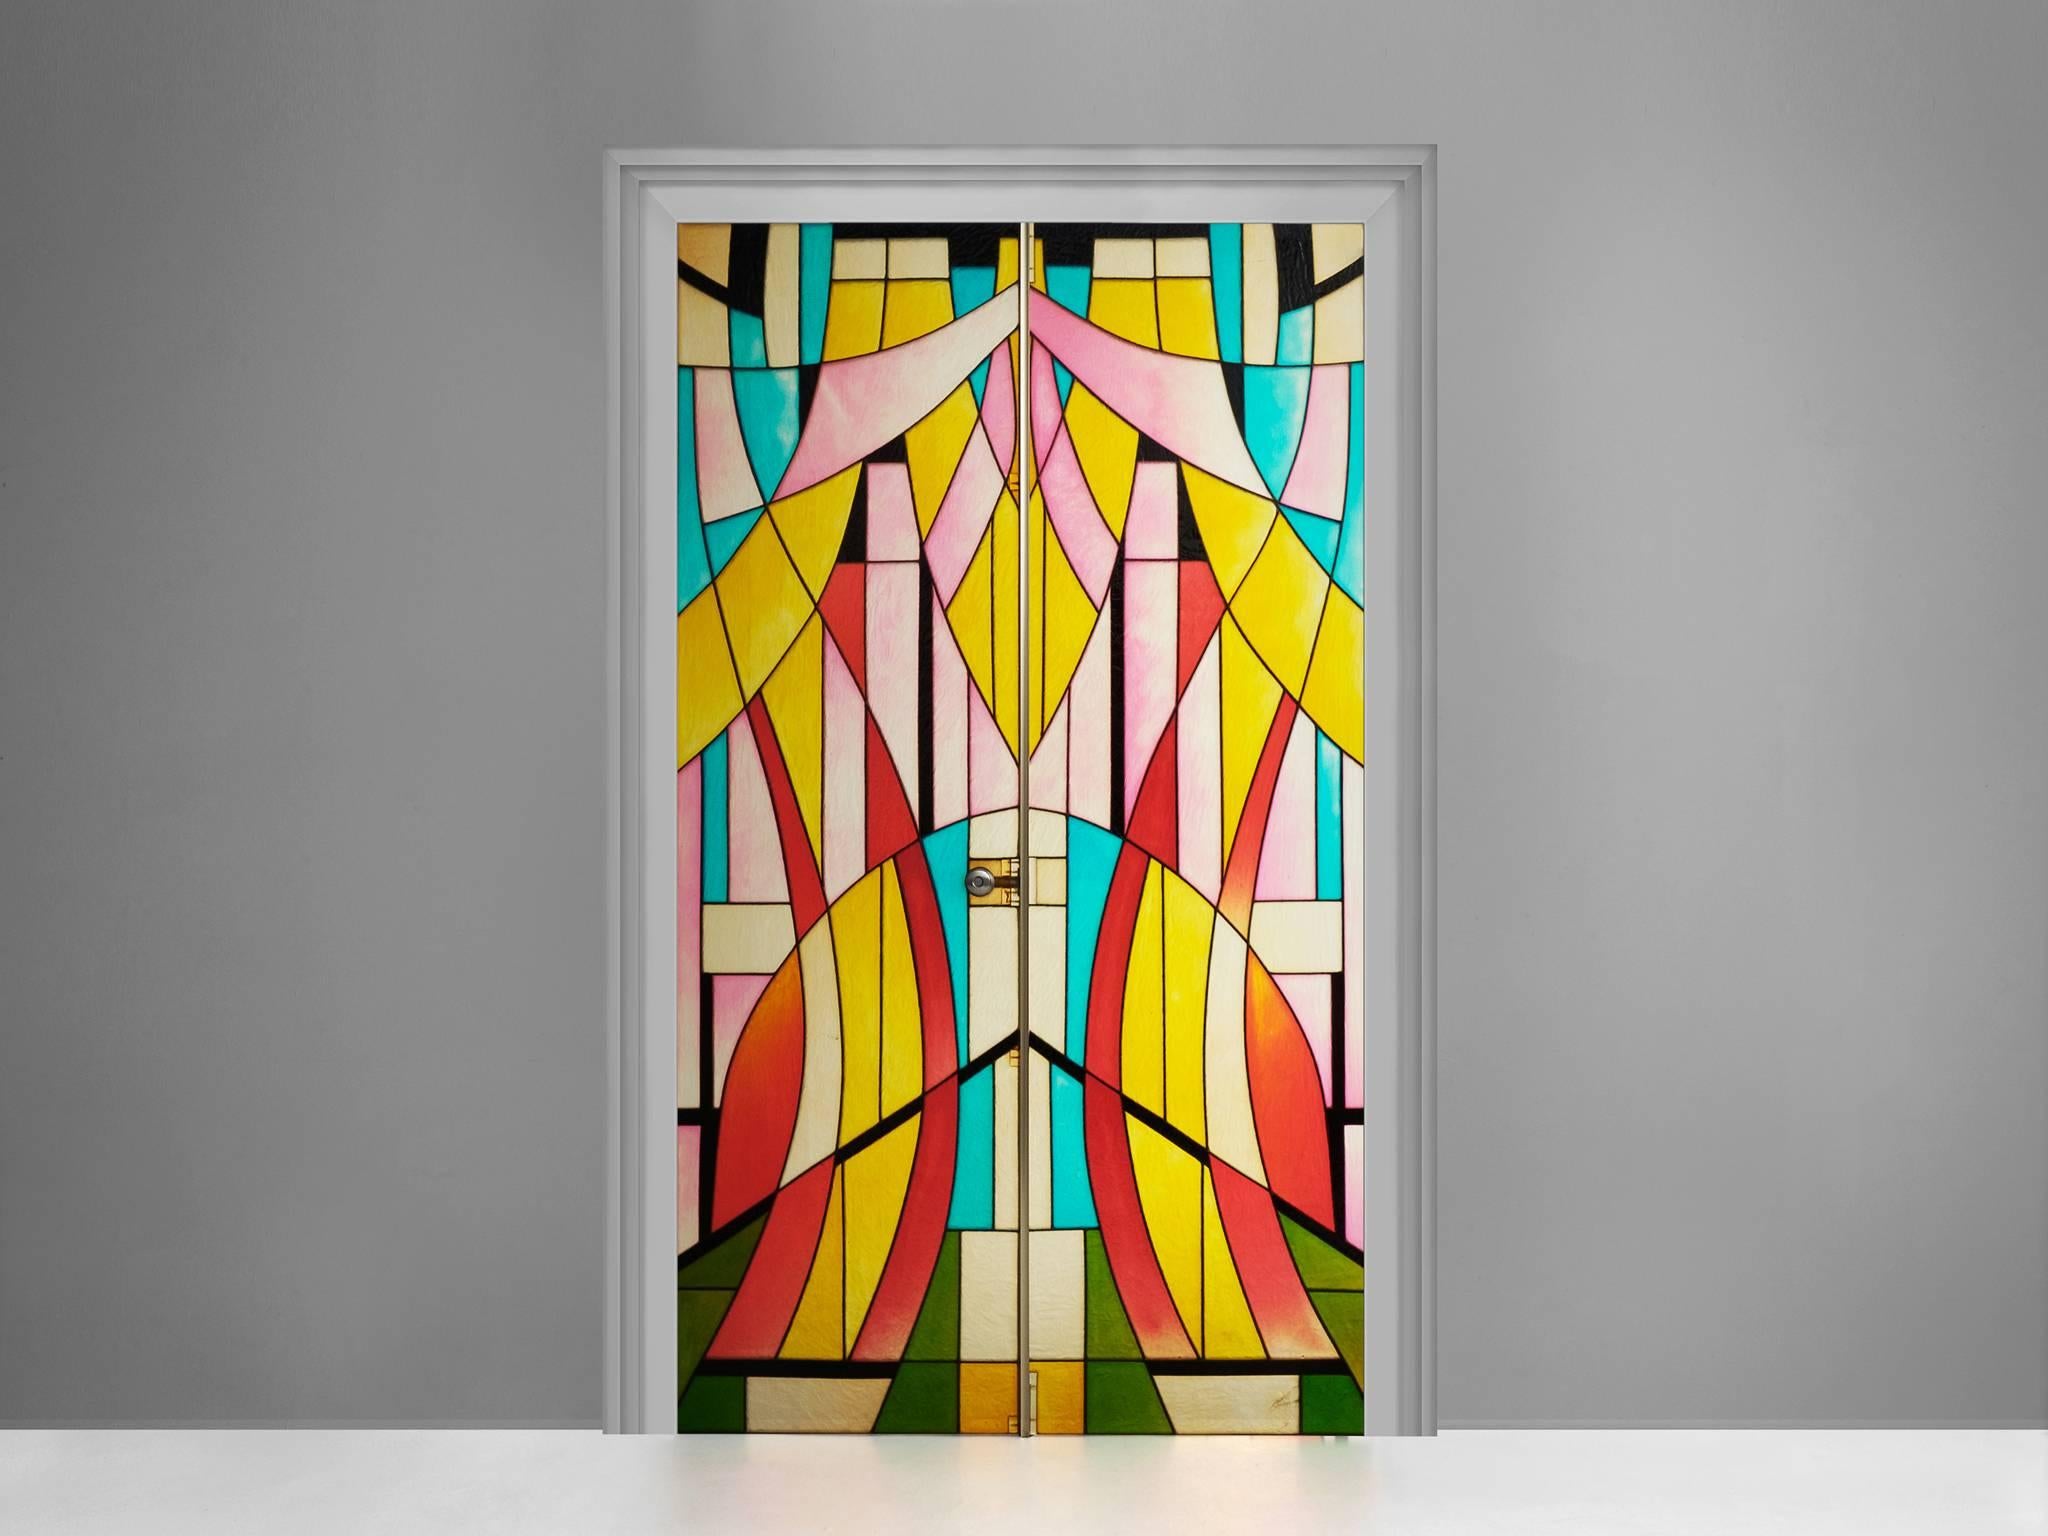 Interior doors, resin, France, 1960s.

Beautifully colored mid-20th century styled interior doors made of multicolored fiberglass. Perfect as ensuite doors. The different colored shapes creating a beautiful colored glow, even when there's no